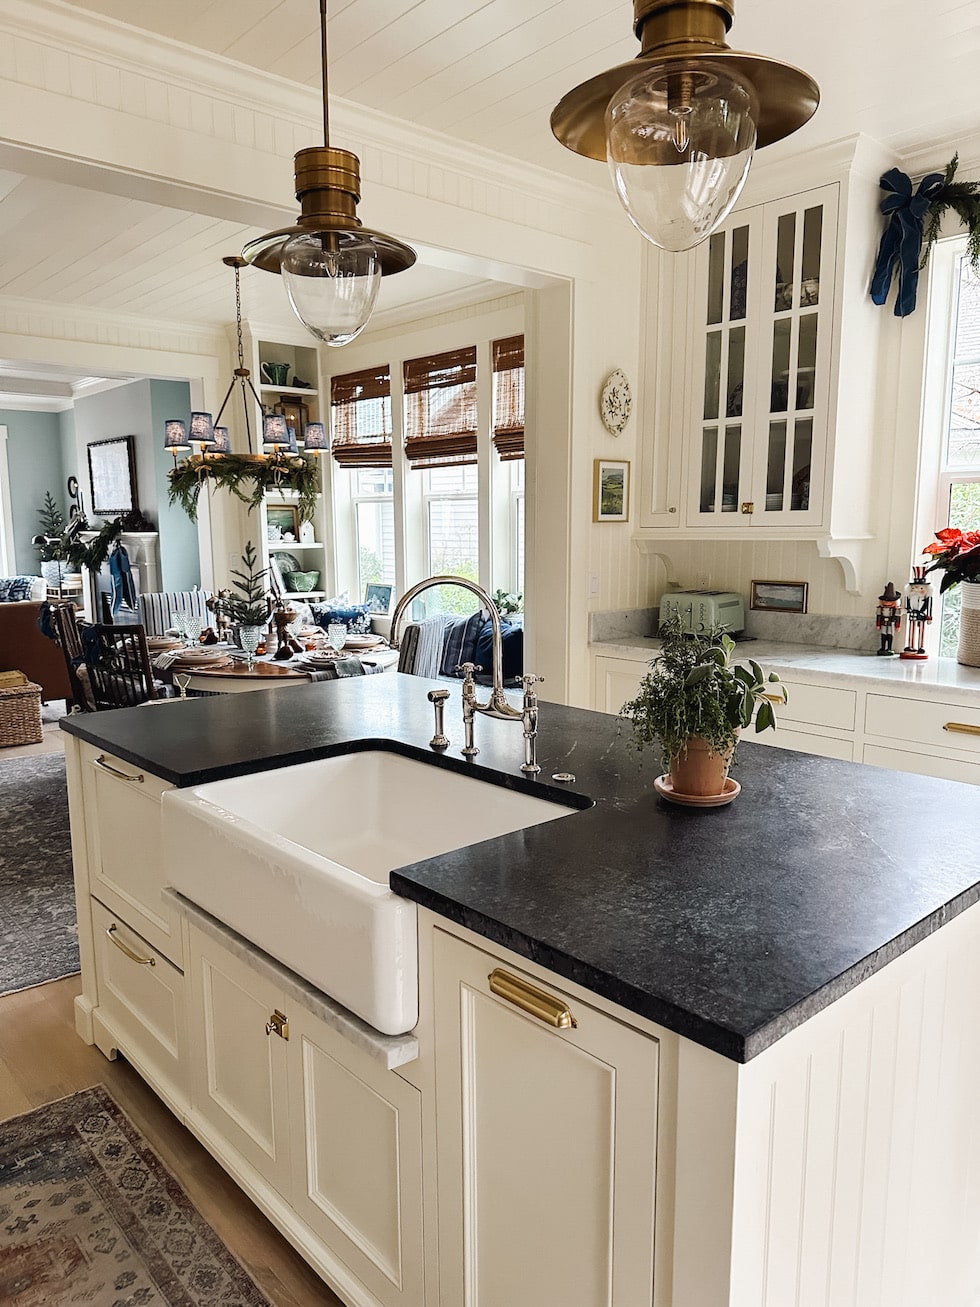 The Story of Our English-Inspired Cottage Kitchen at Christmas